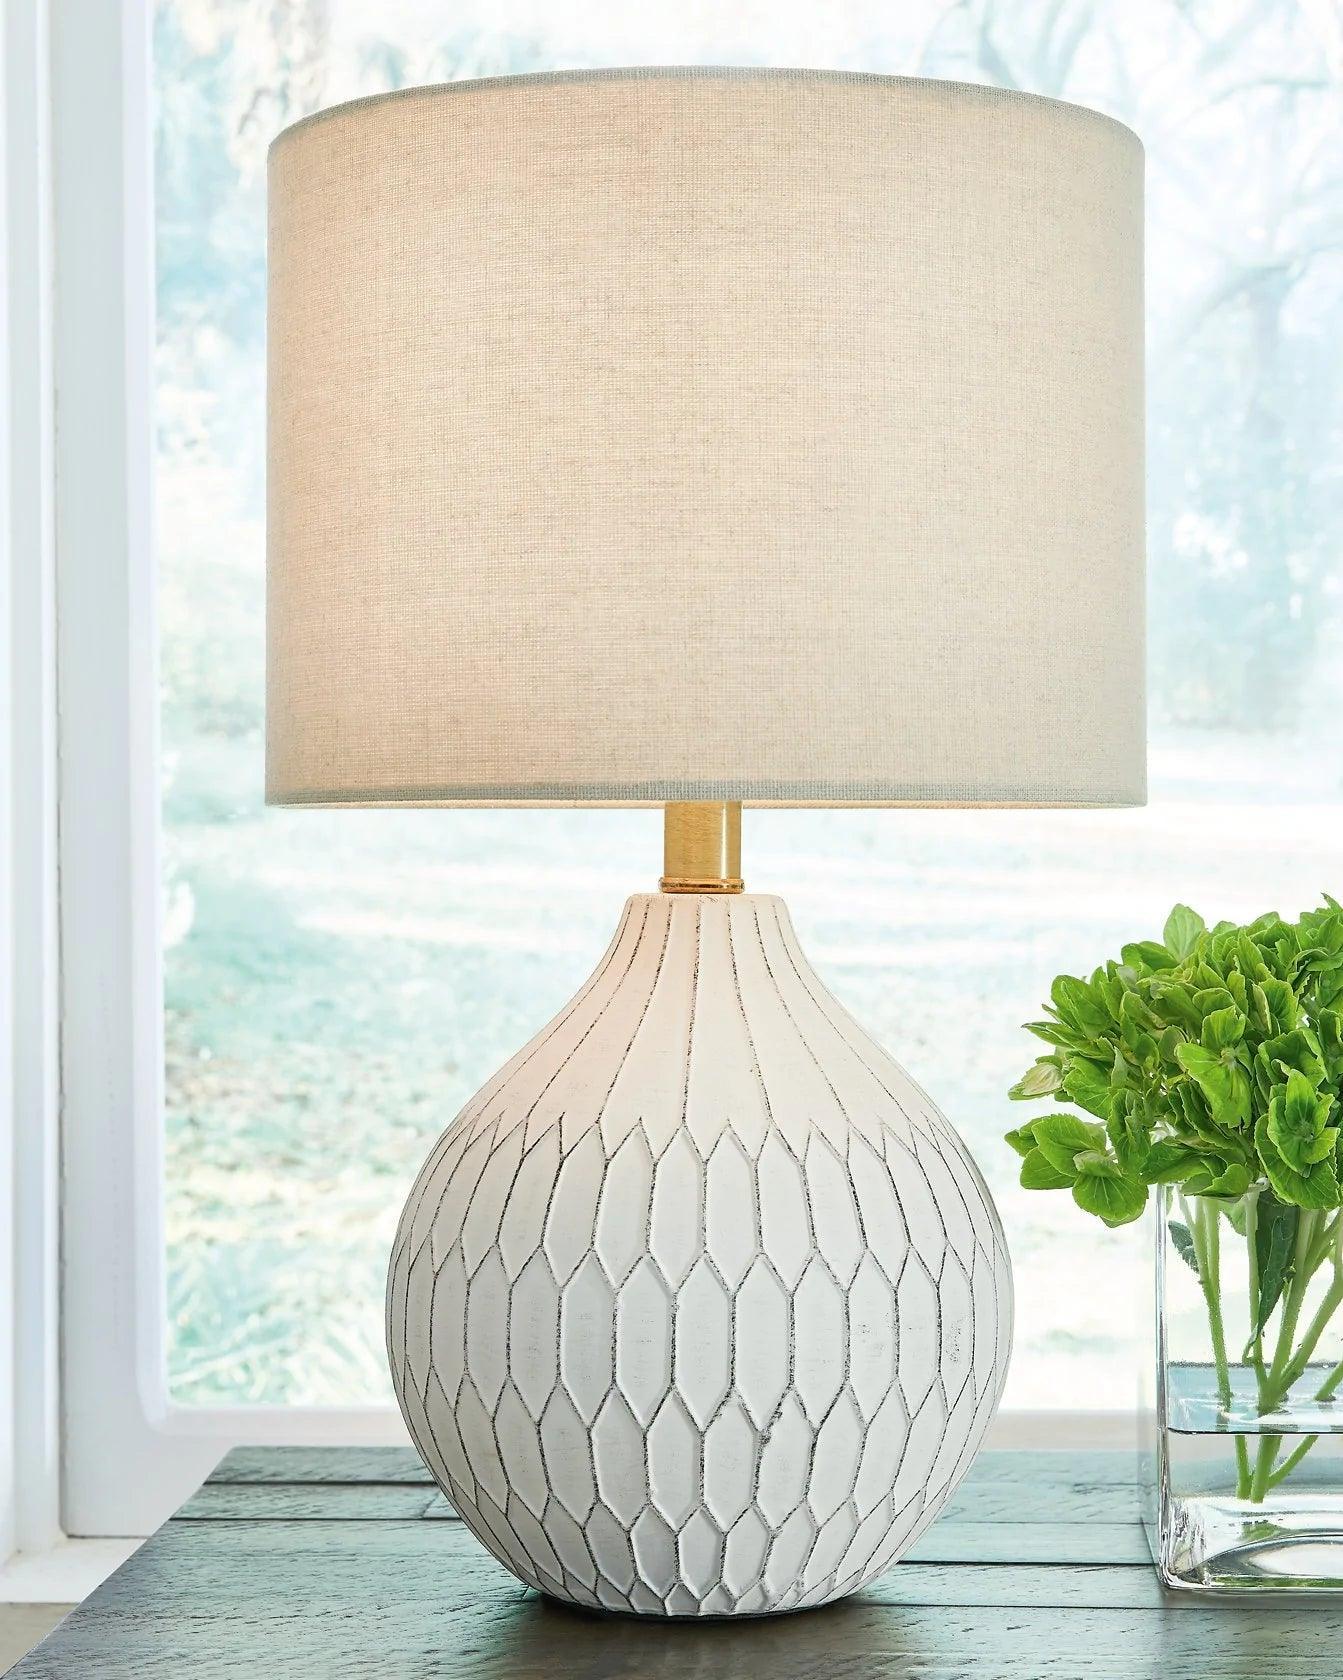 BELLARIVA Classic Table Lamp by The Light Library